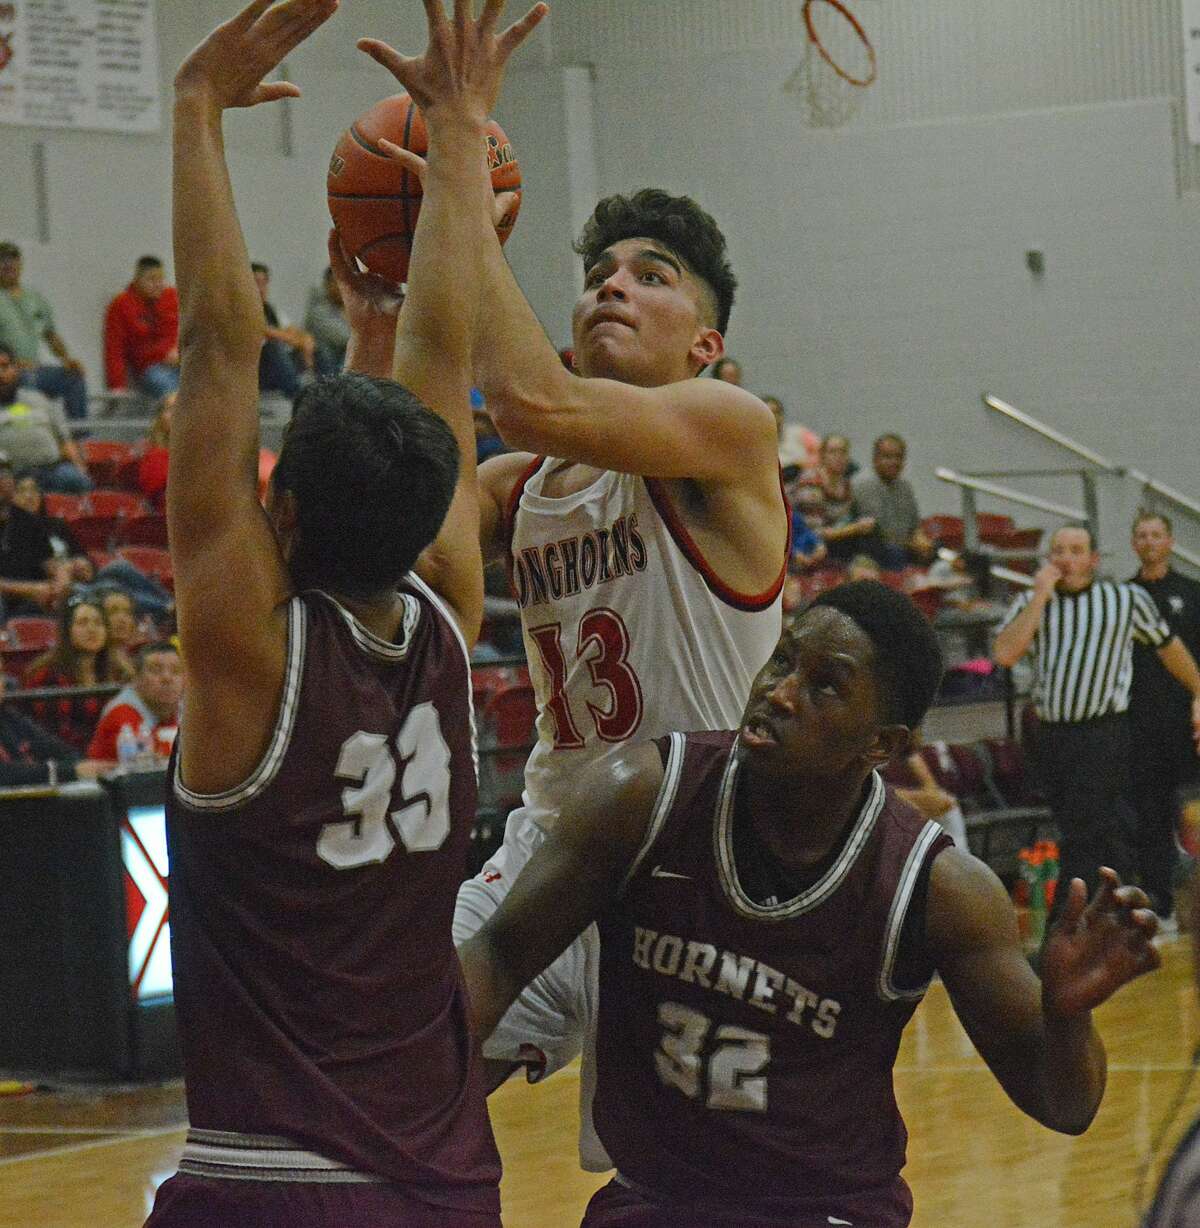 Lockney’s Noel Ceniceros puts up the shot while being defended by Tulia players Alan Garcia (33) and Mitchell Roberts during their boys basketball game in the Longhorn Shootout at Lockney High School on Friday night.